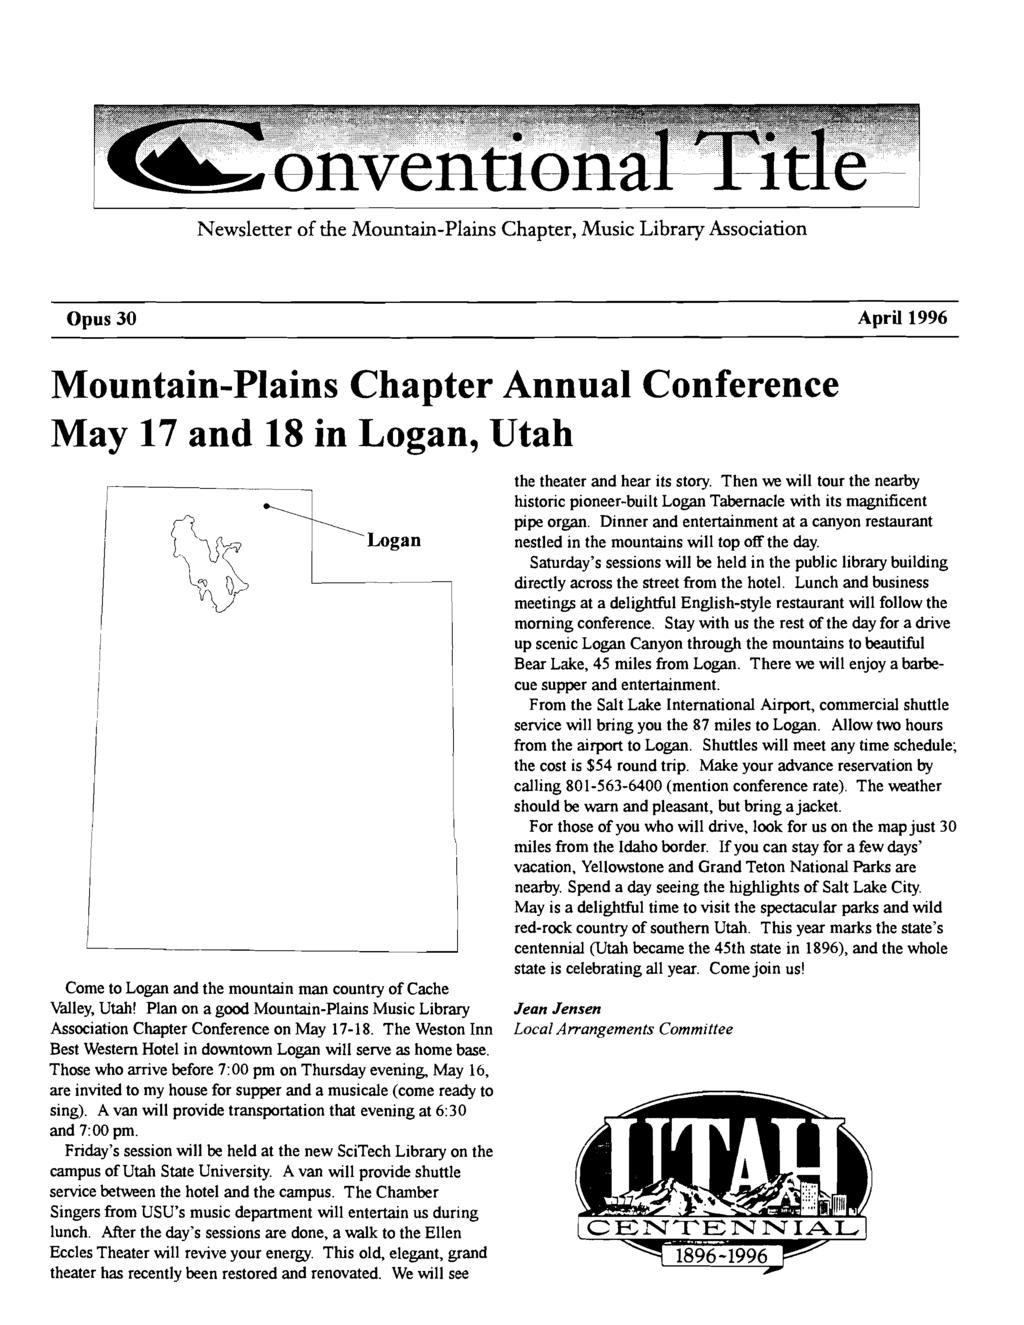 Newsletter of the Mountain-Plains Chapter, Music Library Association Opus 30 April 1996 Mountain-Plains Chapter Annual Conference May 17 and 18 in Logan, Utah Logan Come to Logan and the mountain man